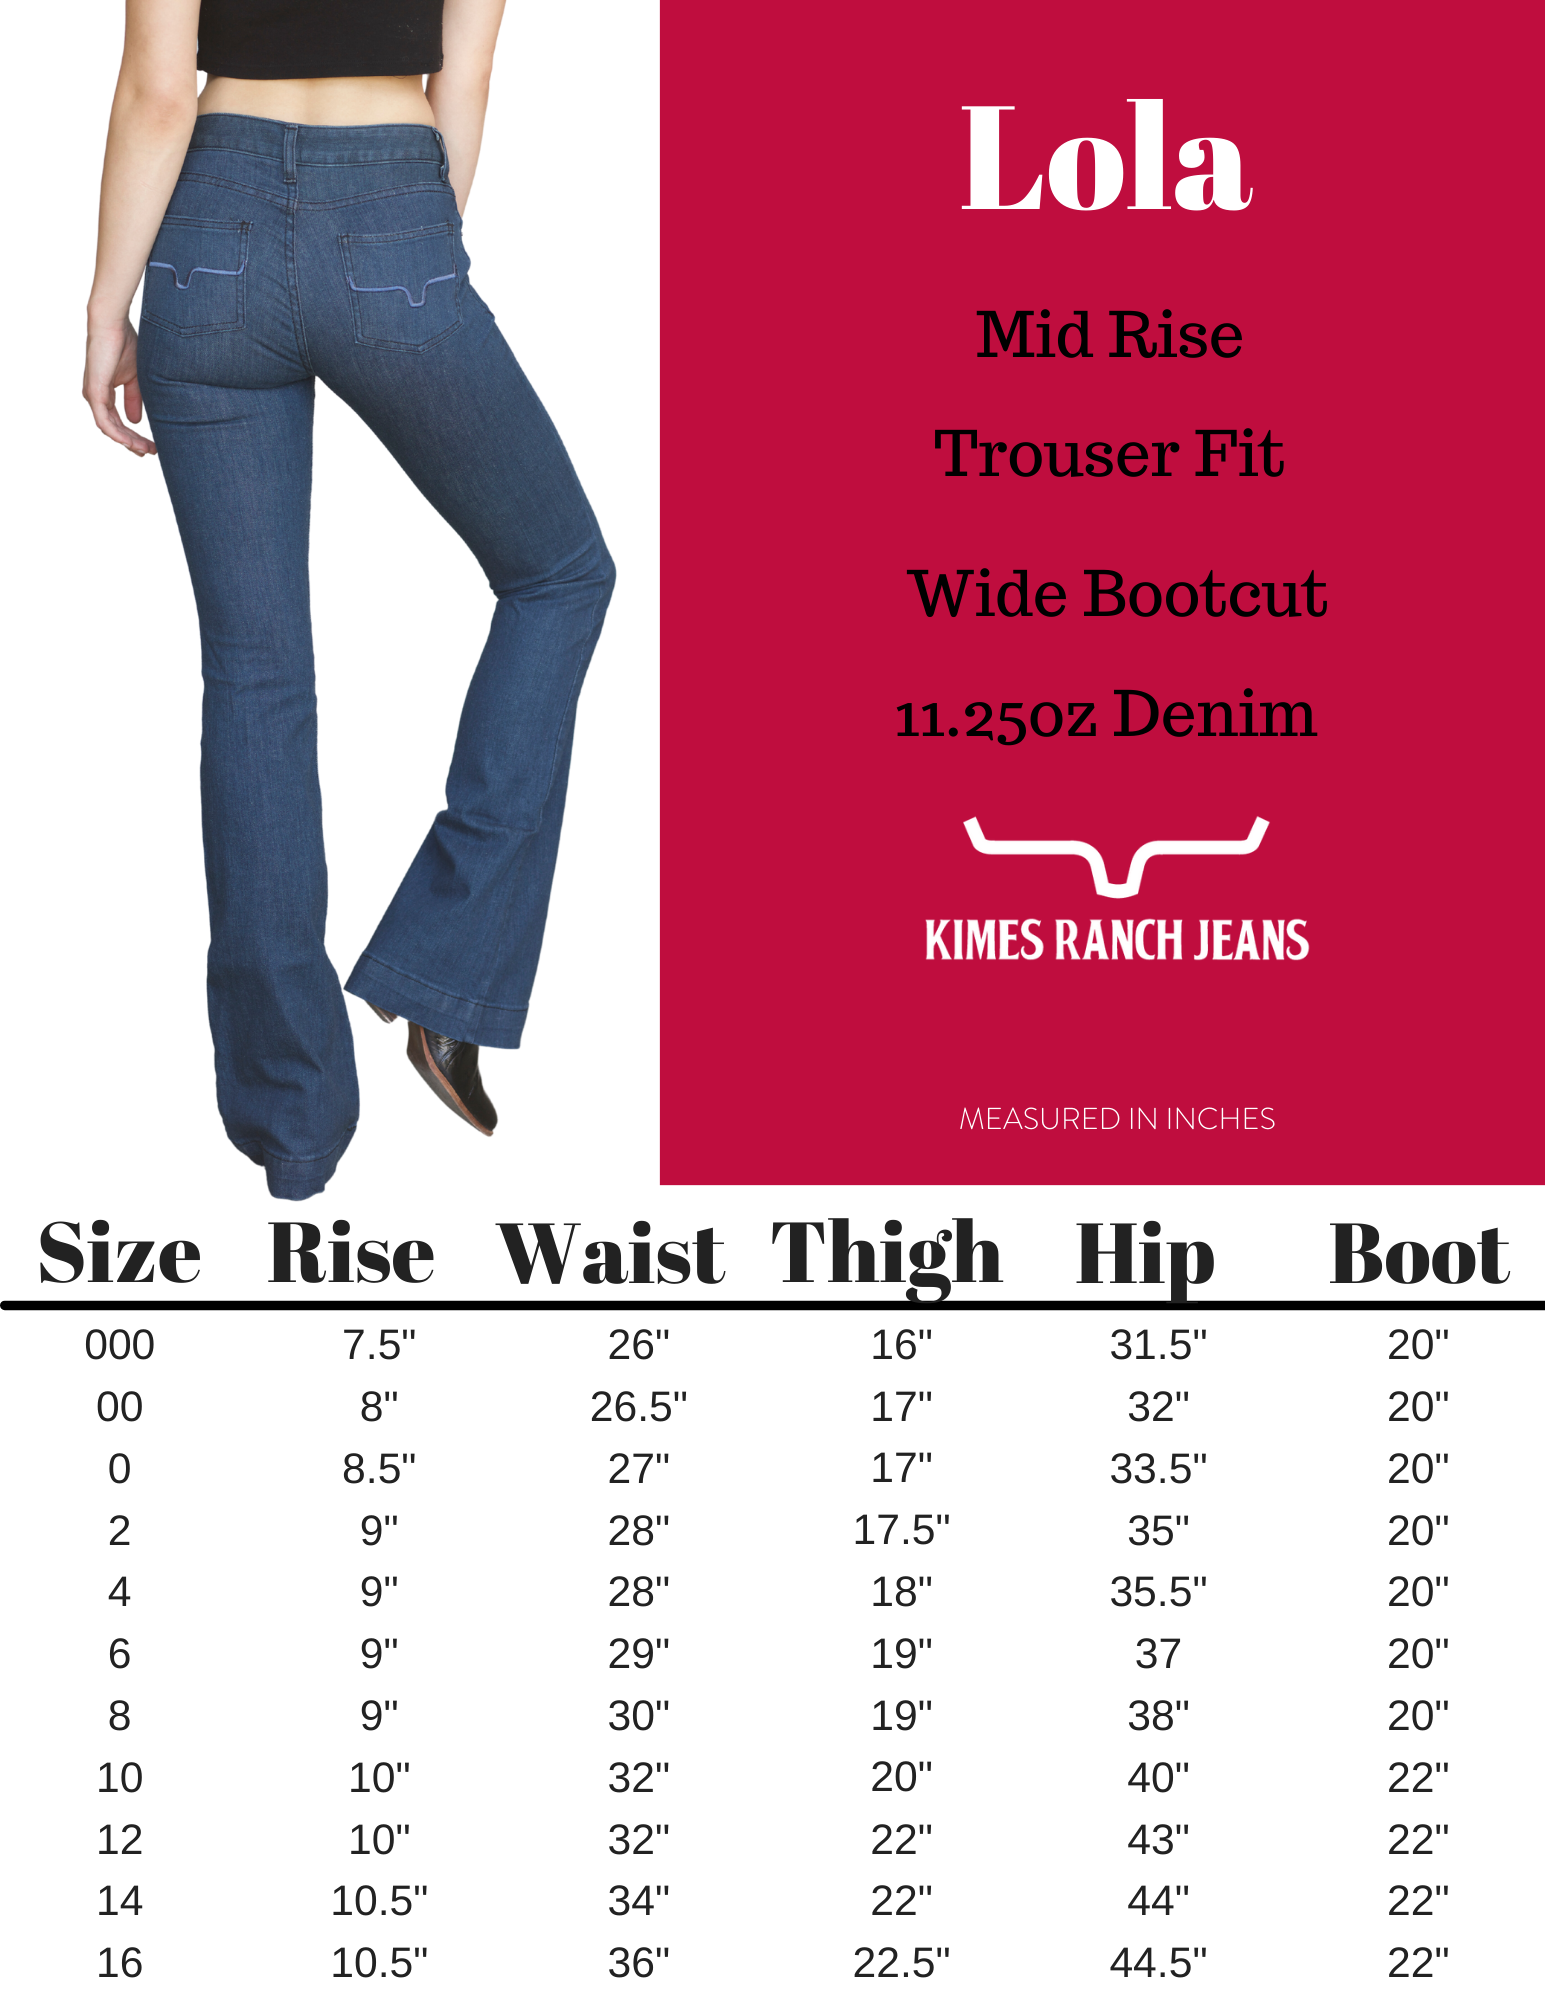 jean size chart | BKE_Jeans_Size_Chart_Women  http://i2buy.net/Wholesale-Fornarina_2011 ... | Jeans size chart, Jeans size,  Clothing size chart